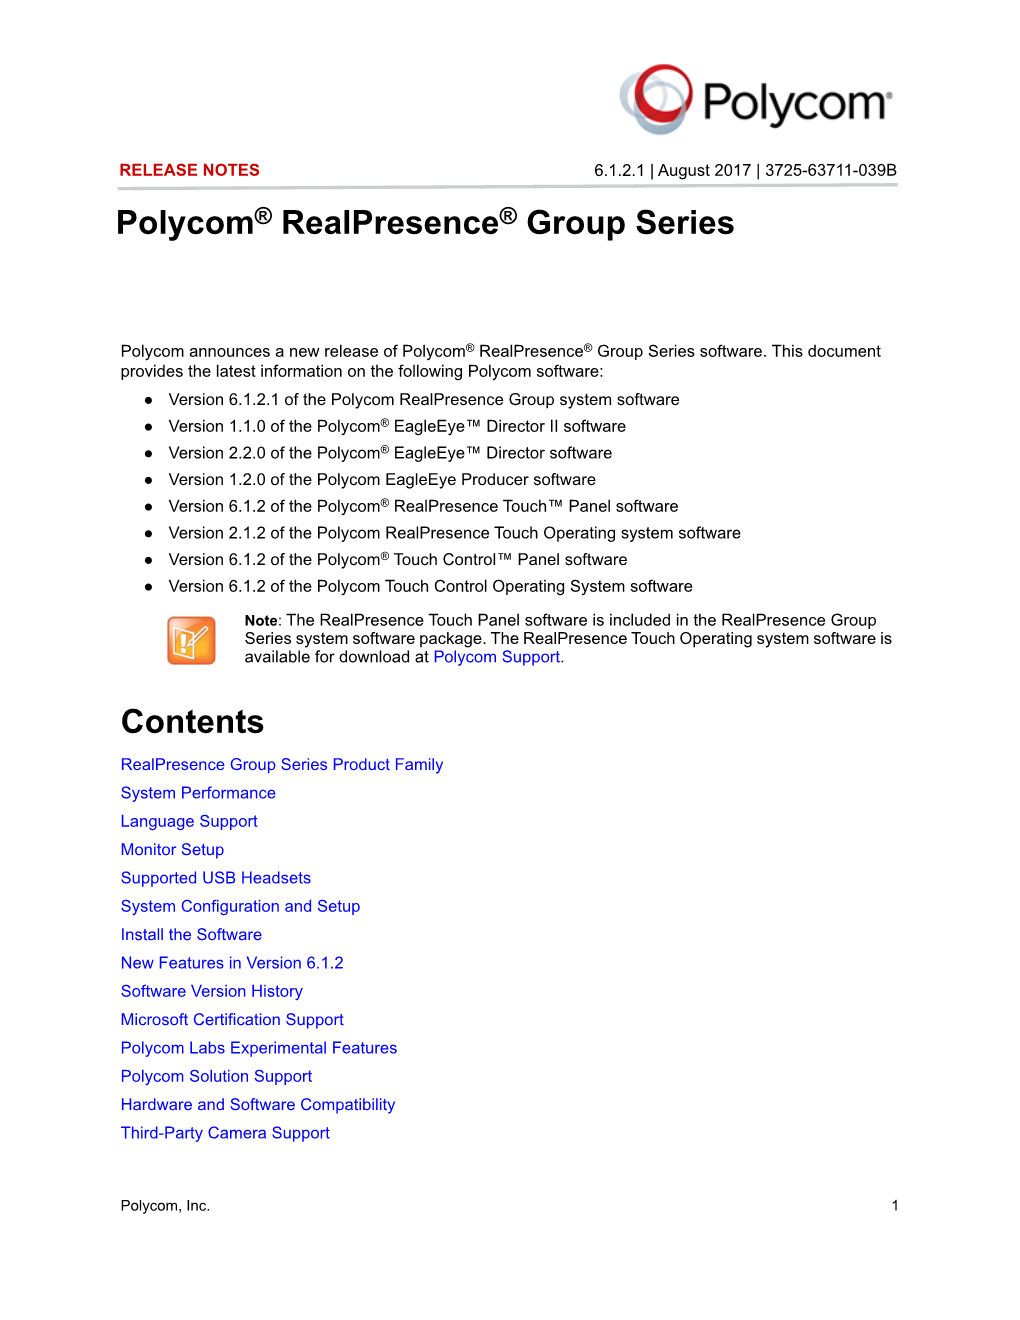 Polycom Realpresence Group Series Release Notes